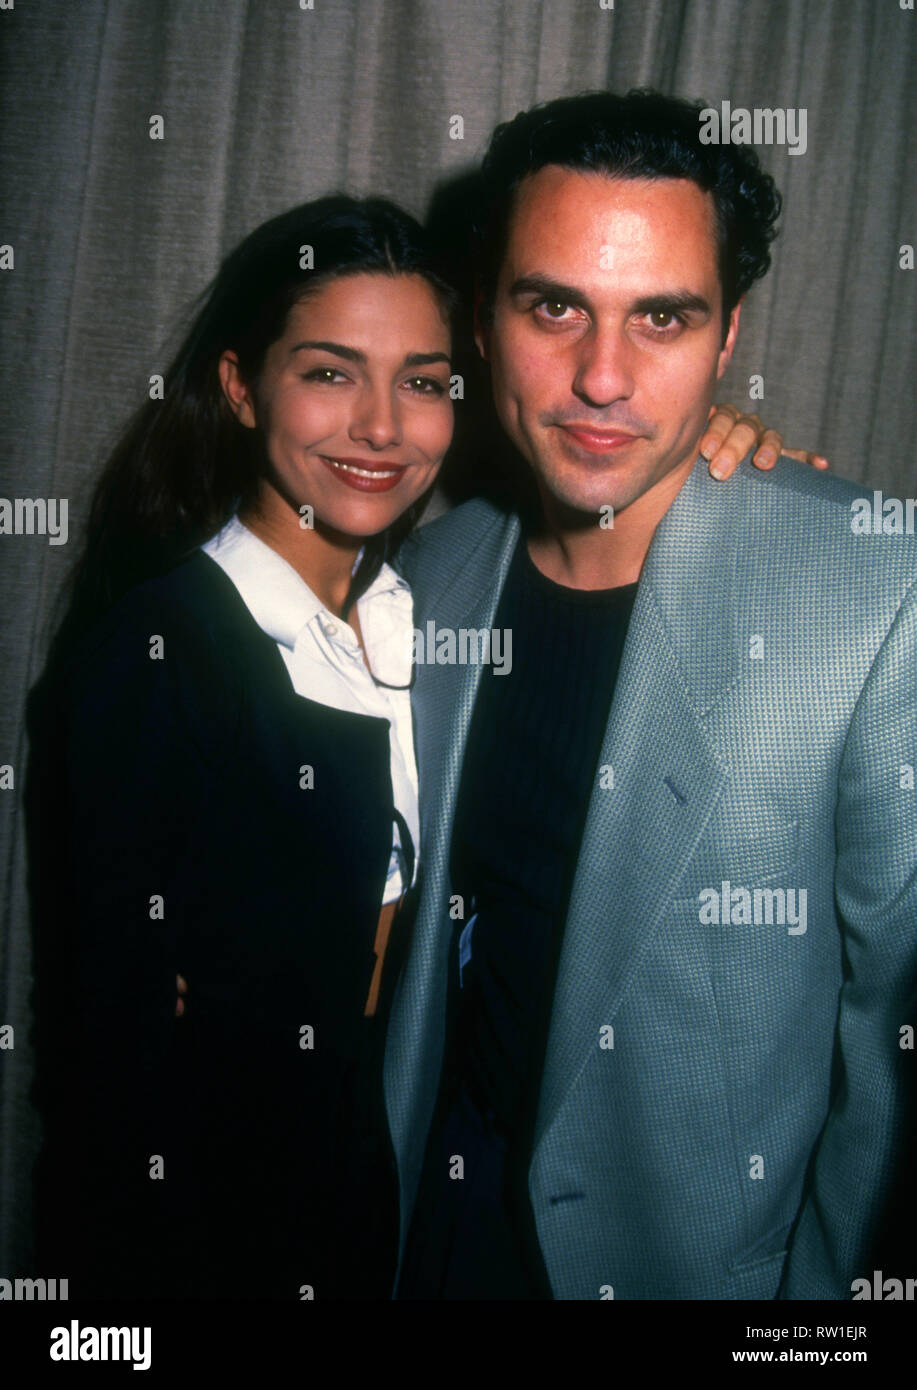 UNIVERSAL CITY, CA - FEBRUARY 6: (EXCLUSIVE) Actress Vanessa Marcil and actor Maurice Benard pose backstage at Ricky Martin Concert on the 'Me Amaras' Tour on February 6, 1994 at Universal Amphitheatre in Universal City, California. Photo by Barry King/Alamy Stock Photo Stock Photo